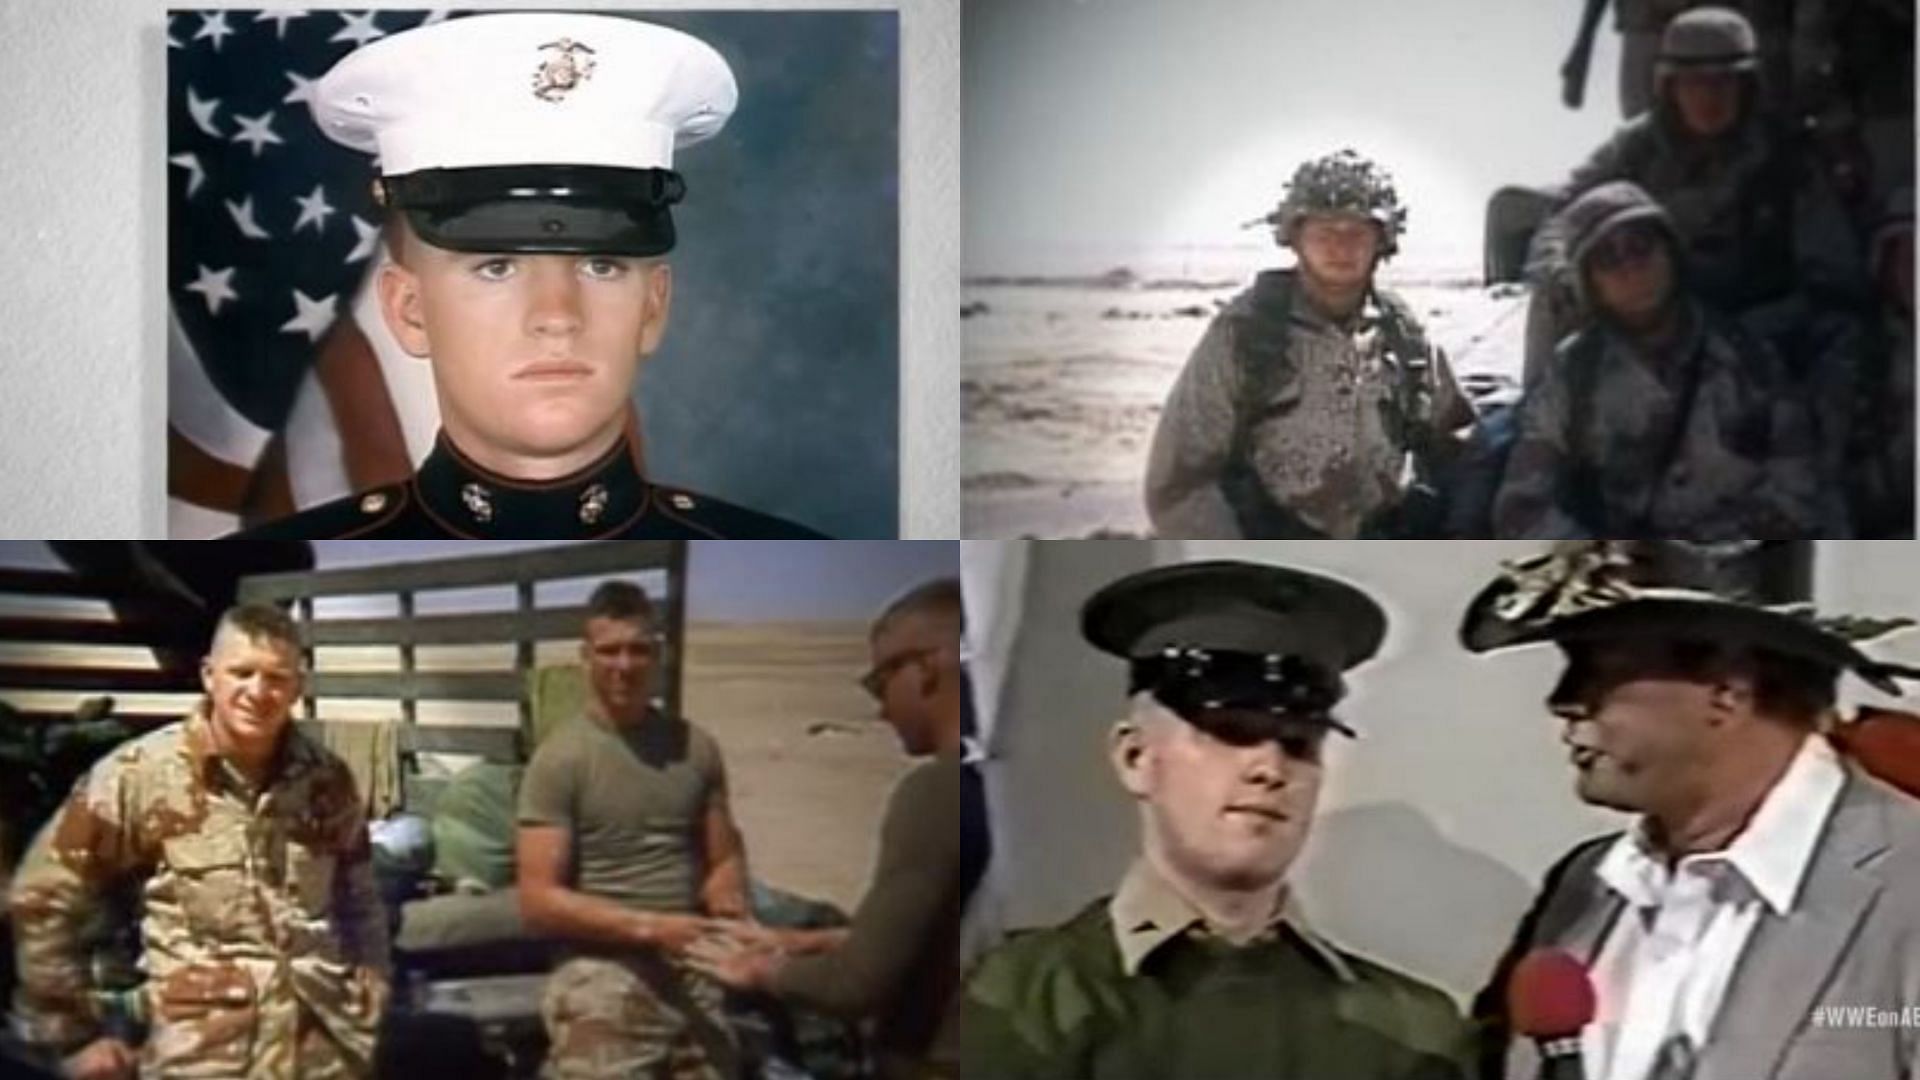 Hall of Famer Road Dogg participated in Operation Desert Storm